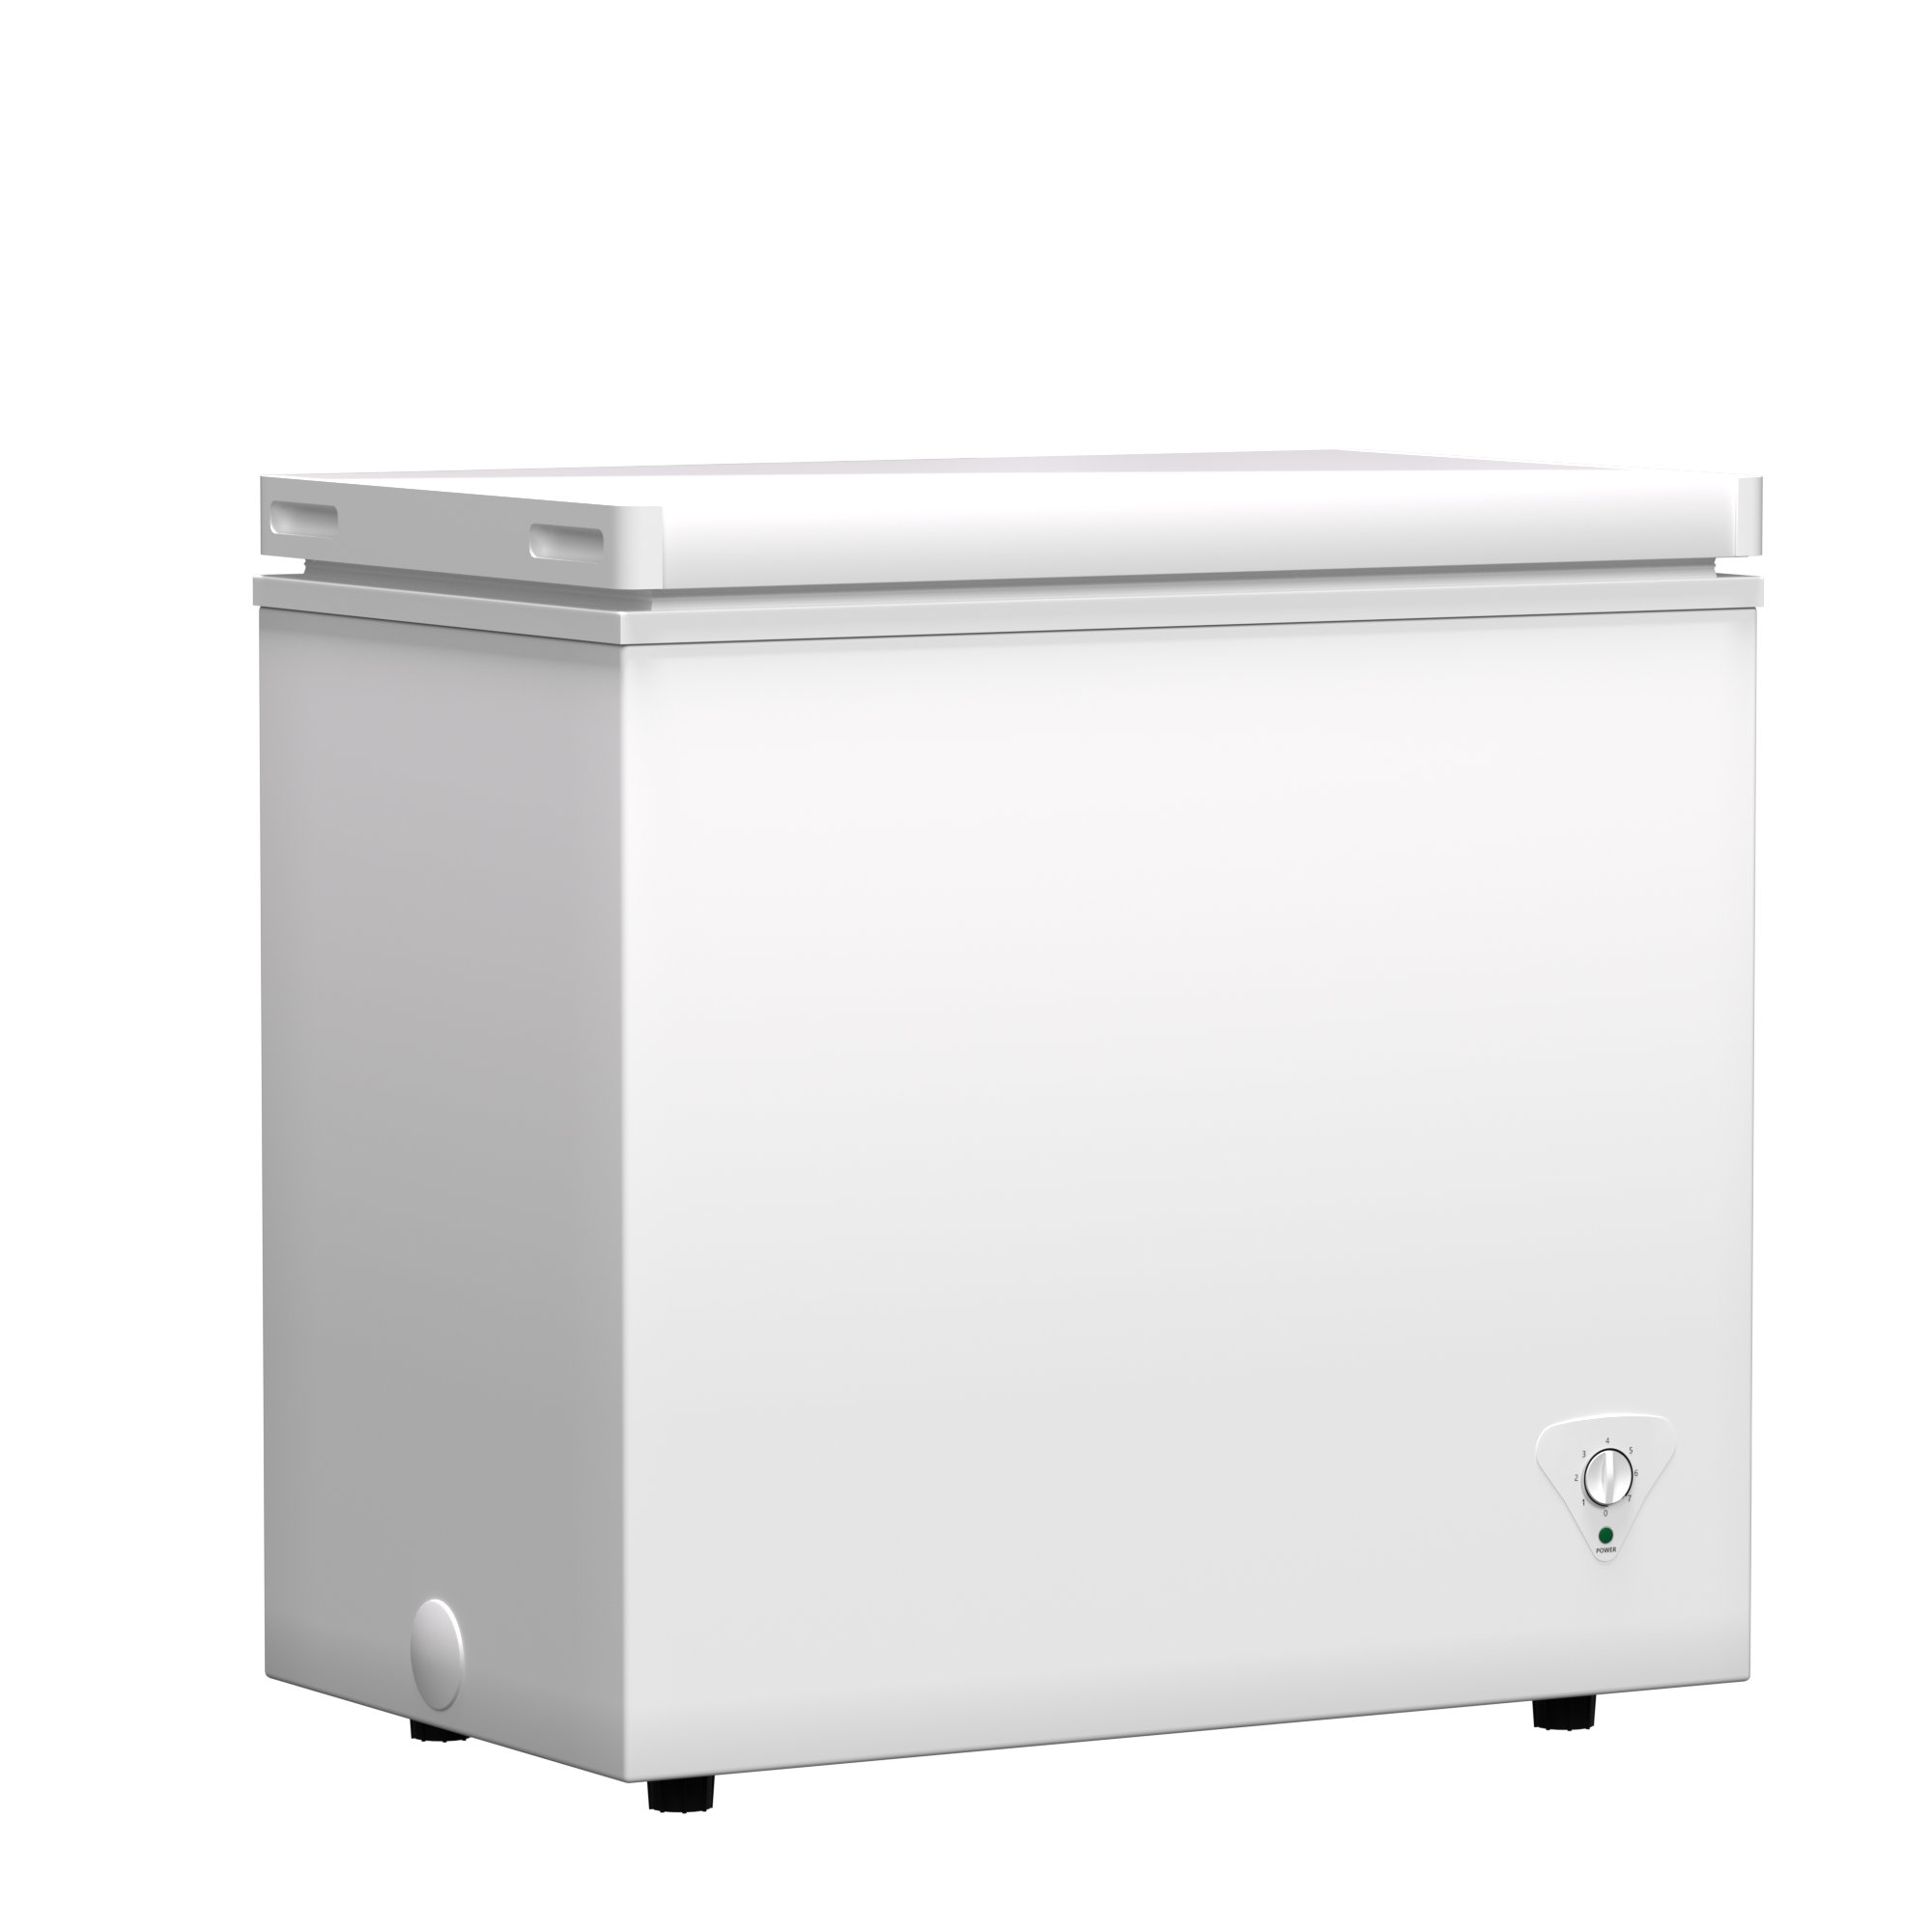 TABU 10 Cubic Feet cu. ft. Chest Freezer with Adjustable